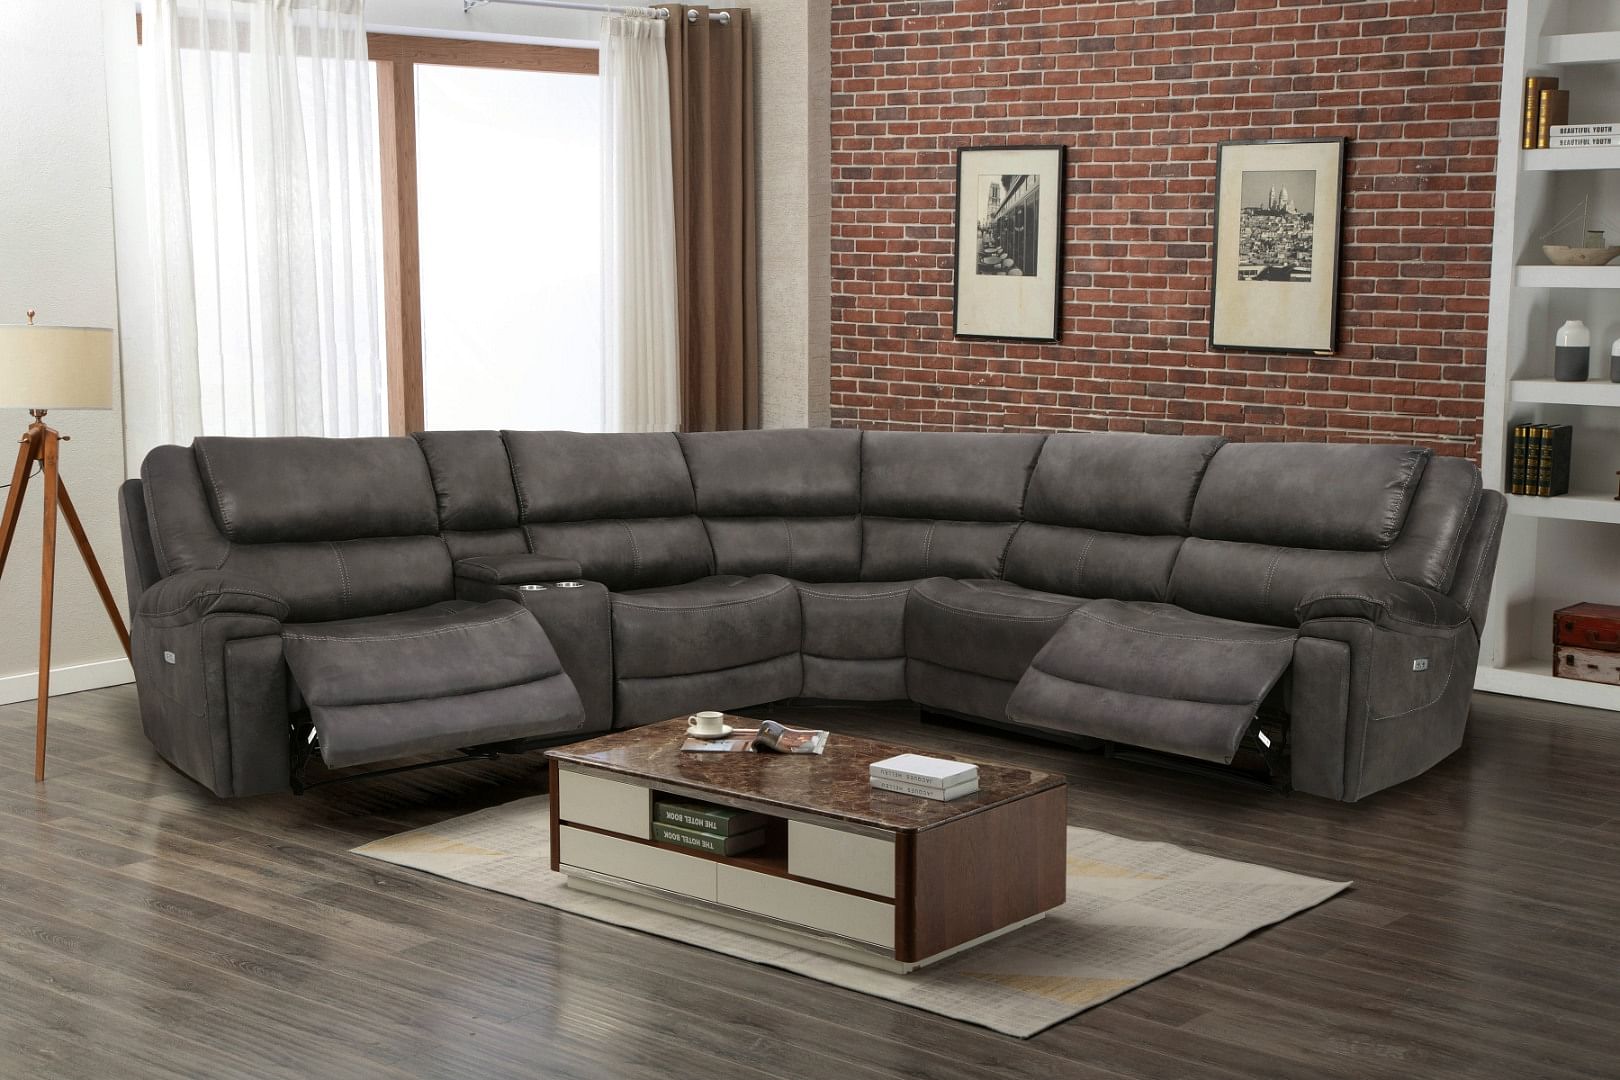 Ashley Furniture - Wyerville 6 PC Sectional